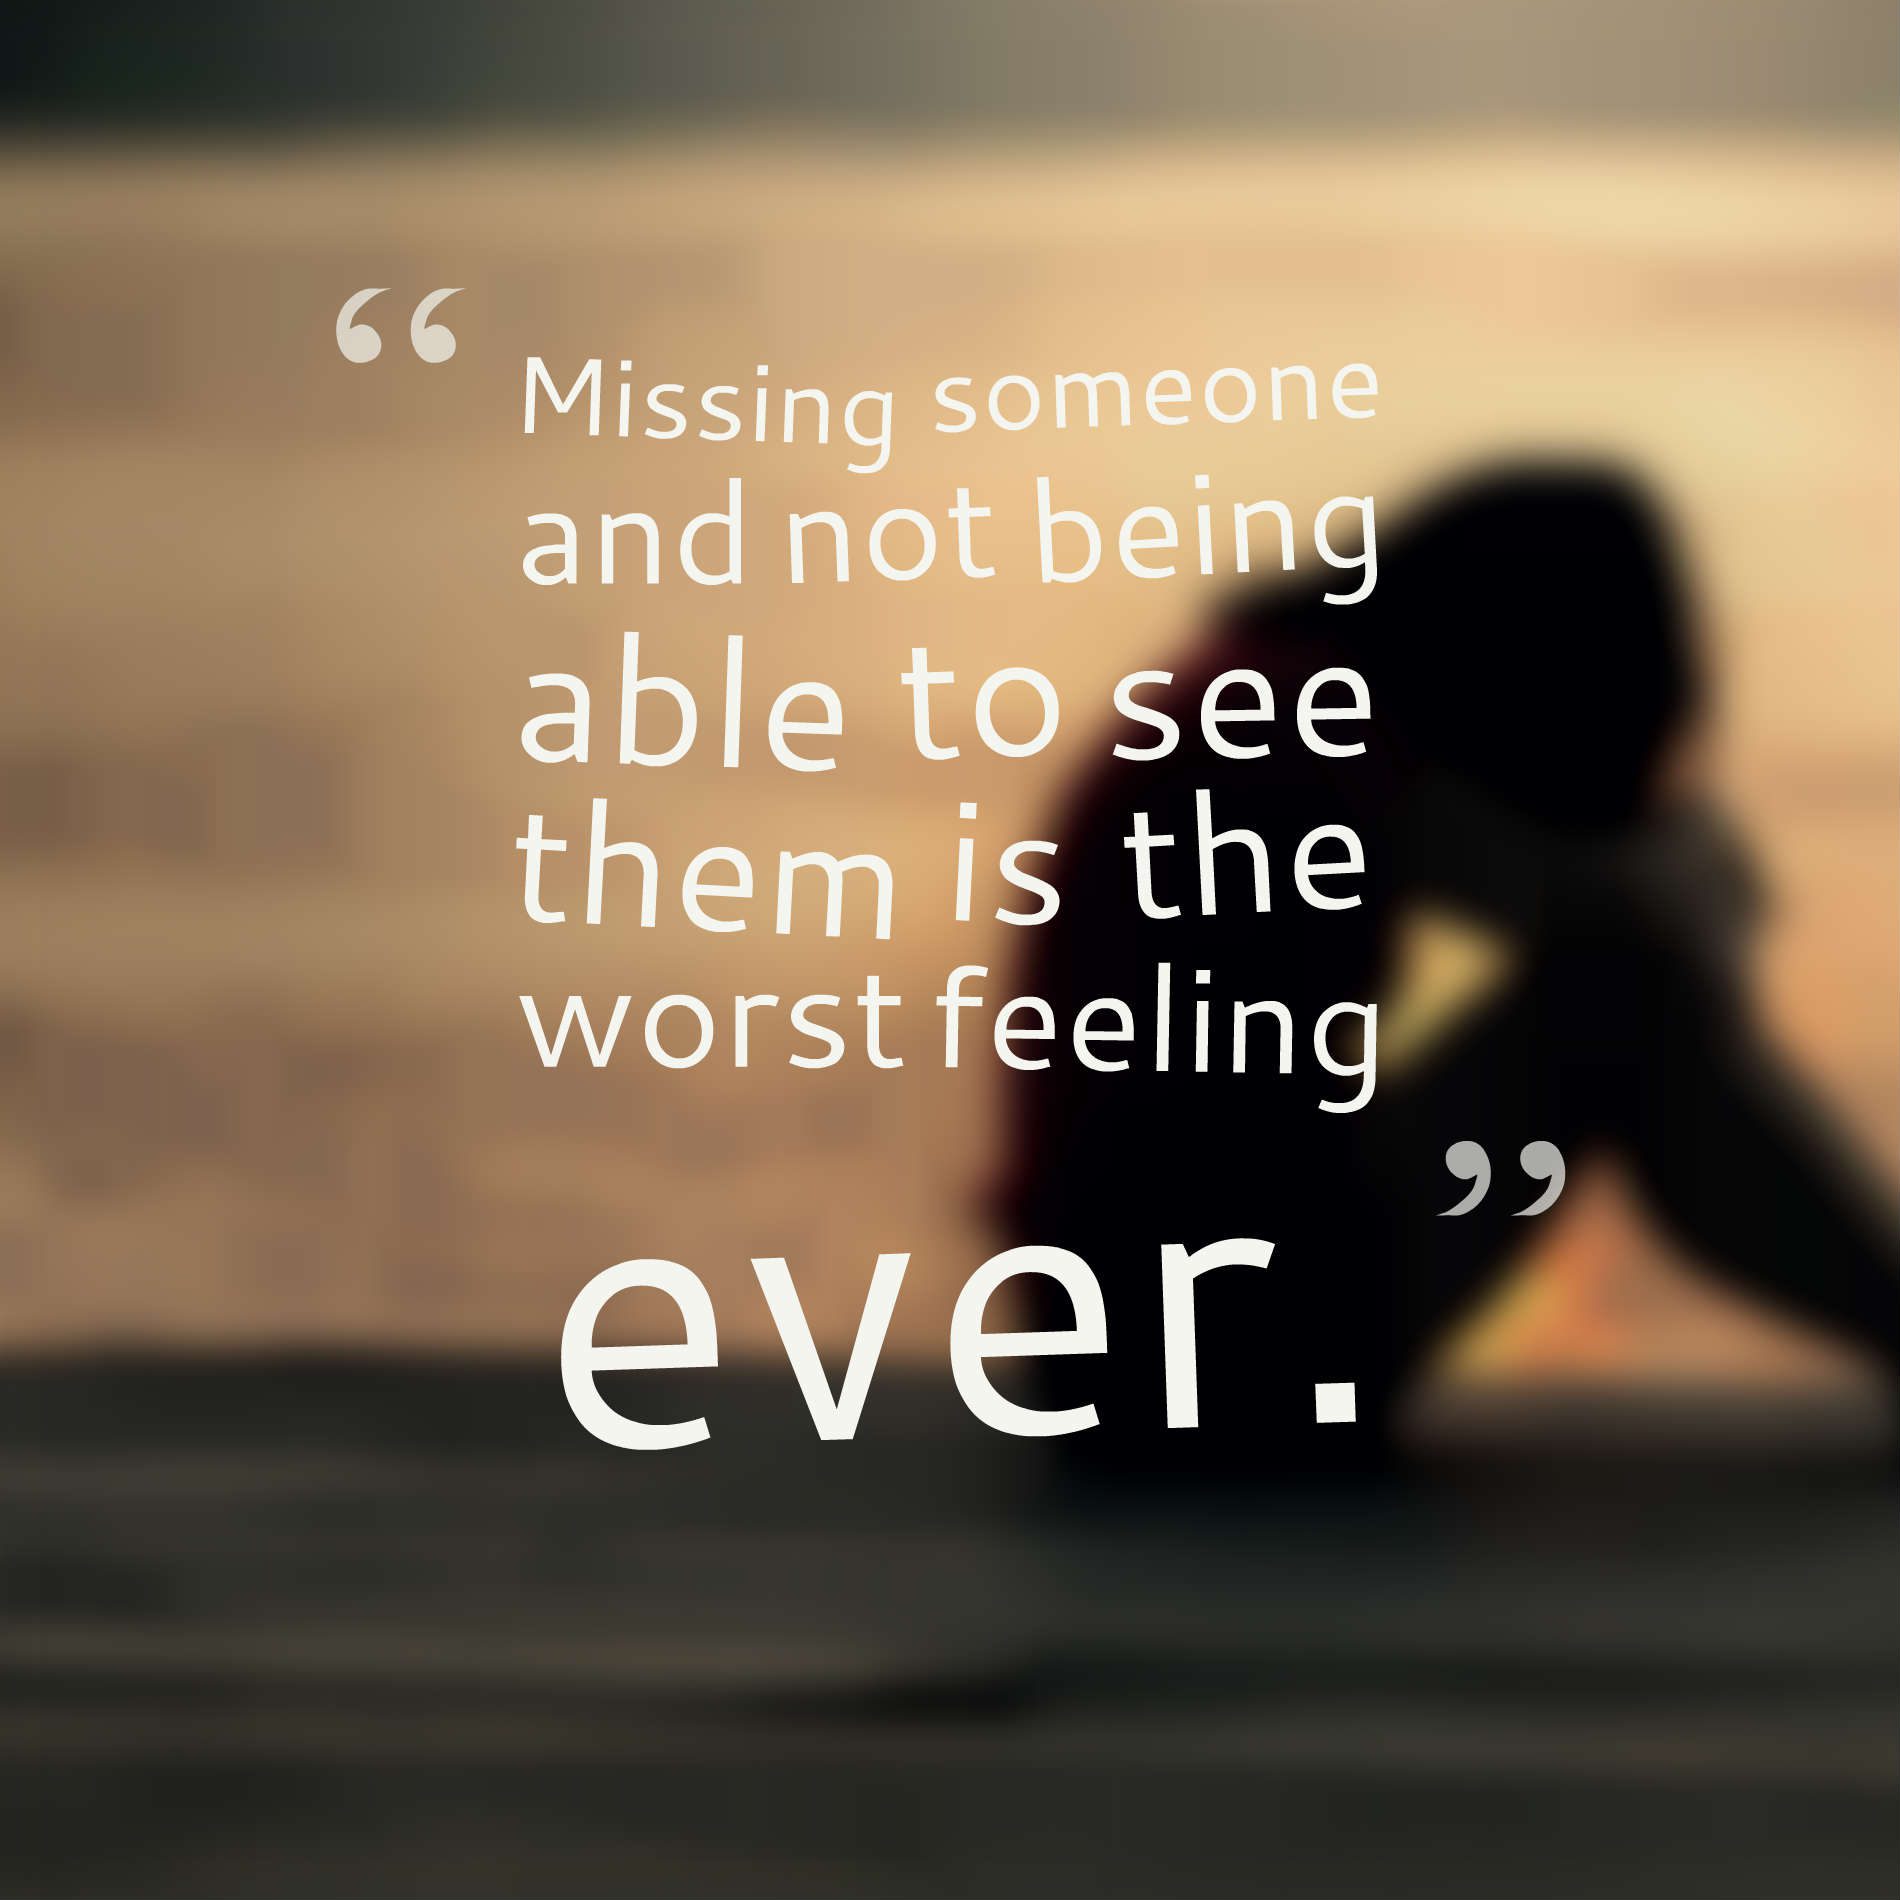 Missing someone and not being able to see them is the worst feeling ever.